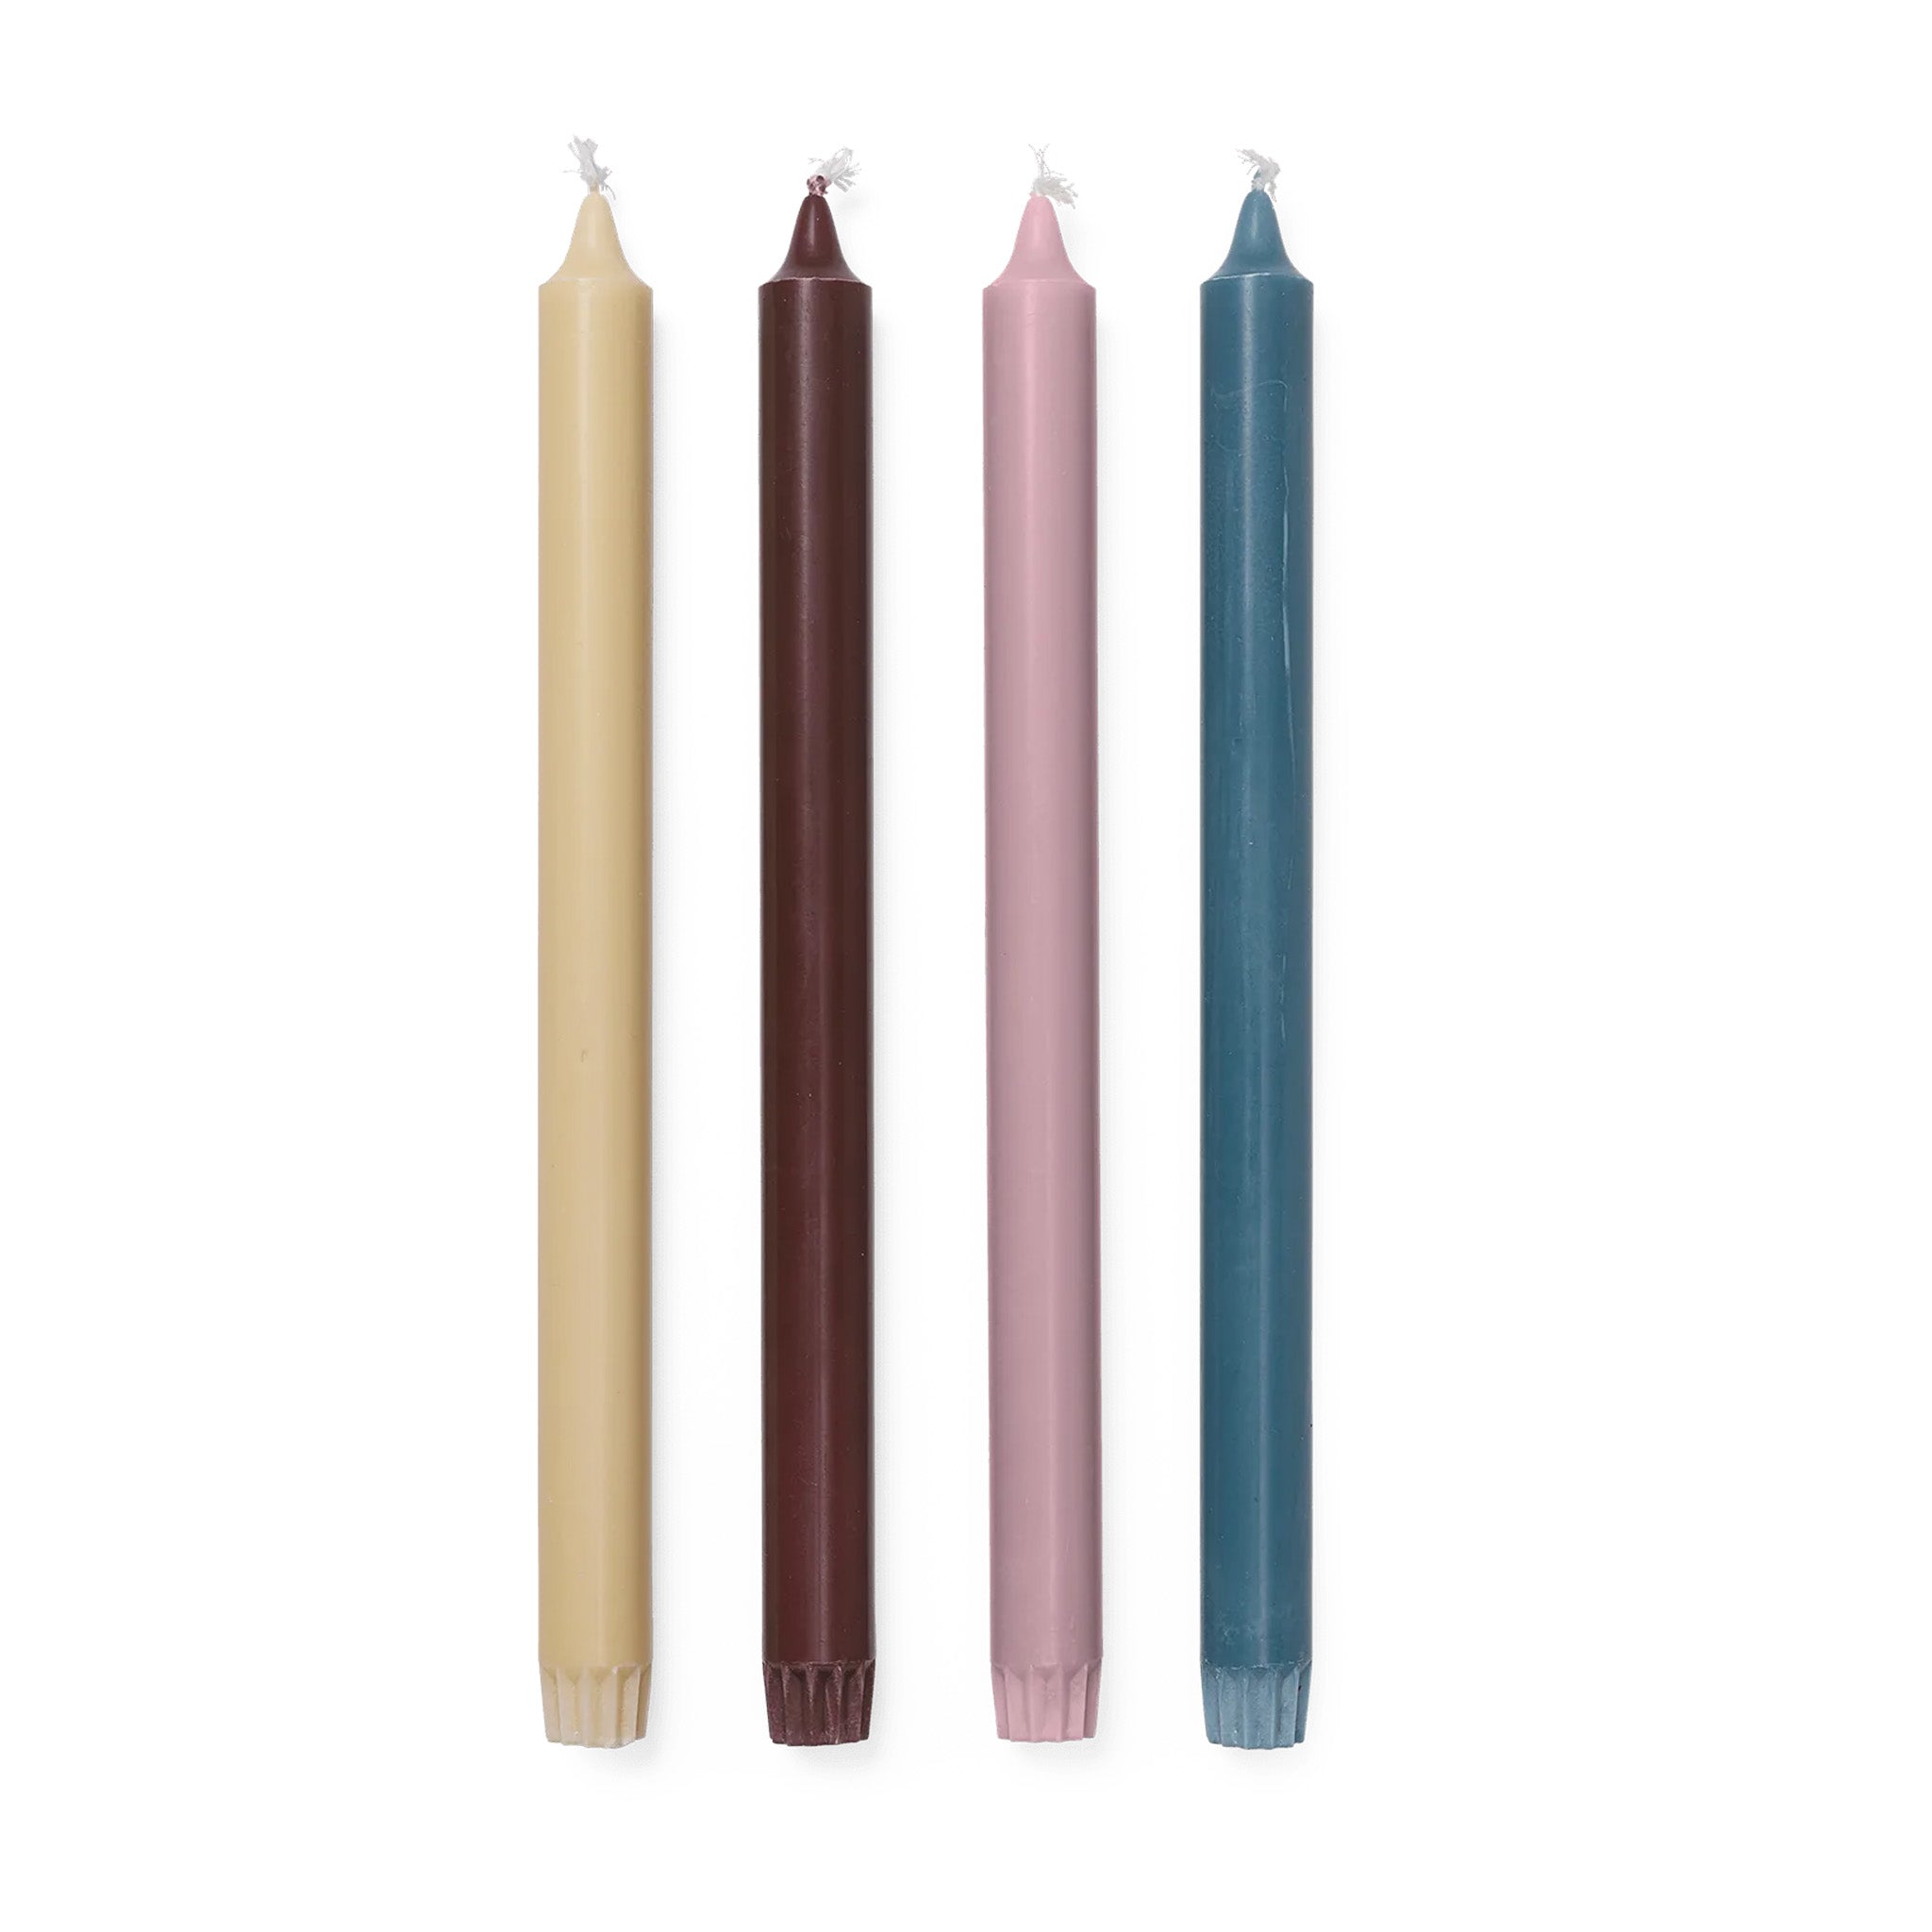 Set of 4 Pure Candles - Whimsical Blend By Ferm Living